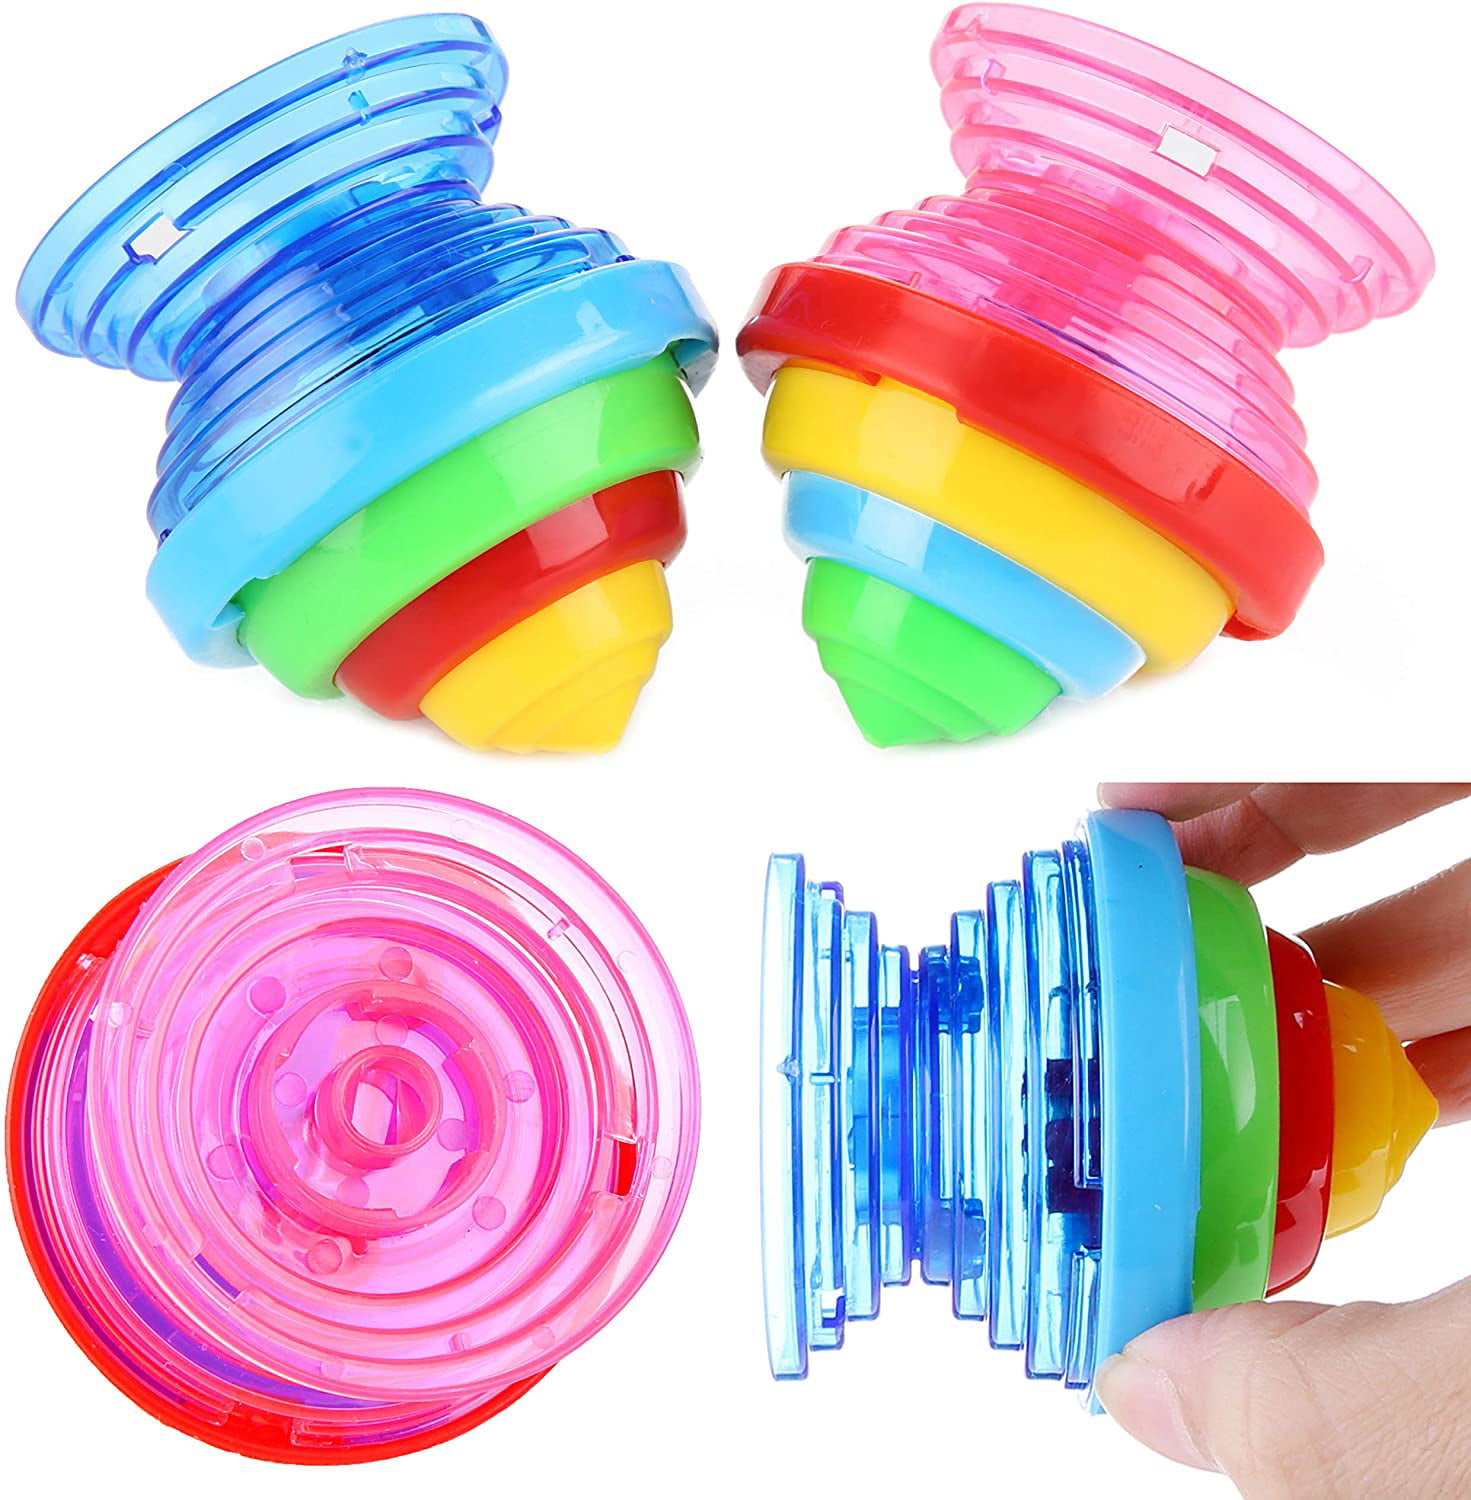 1.75 Inch Spinning Tops in Different Vibrant Colors for Physical Play Enhancing Focus Party Favor 12 Pack Goody Bag Kicko Light Up Spinning Toy Fair Prize